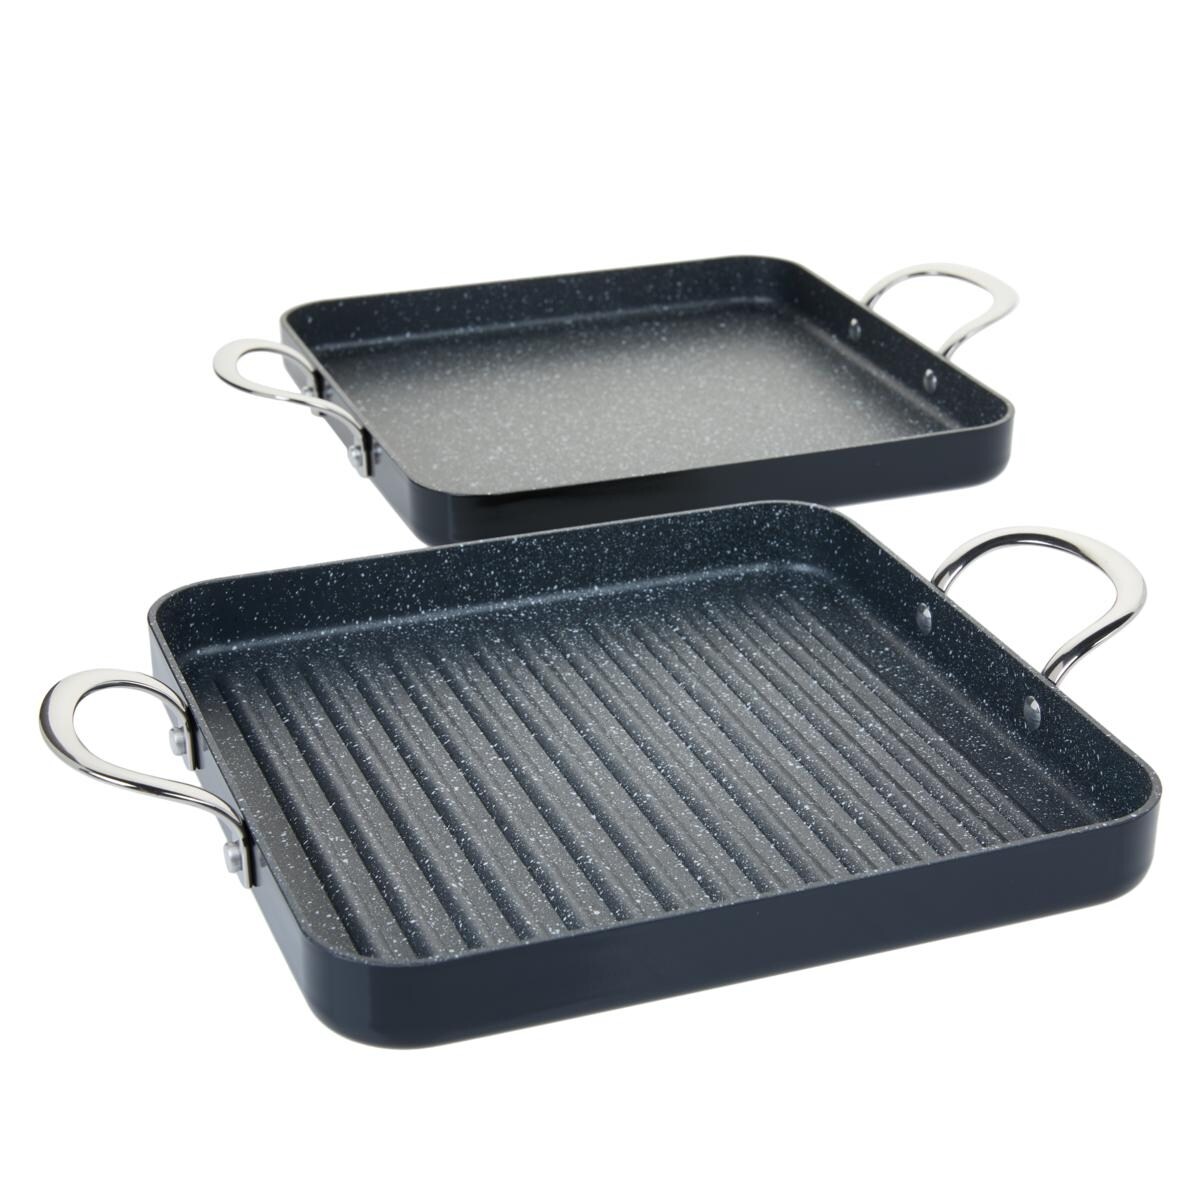 https://ak1.ostkcdn.com/images/products/is/images/direct/80320b94654b25eb88709af9ac80f90b8aa904f5/Curtis-Stone-Dura-Pan-Nonstick-Square-Grill-Pan-and-Griddle-Pan-Model-672-799.jpg